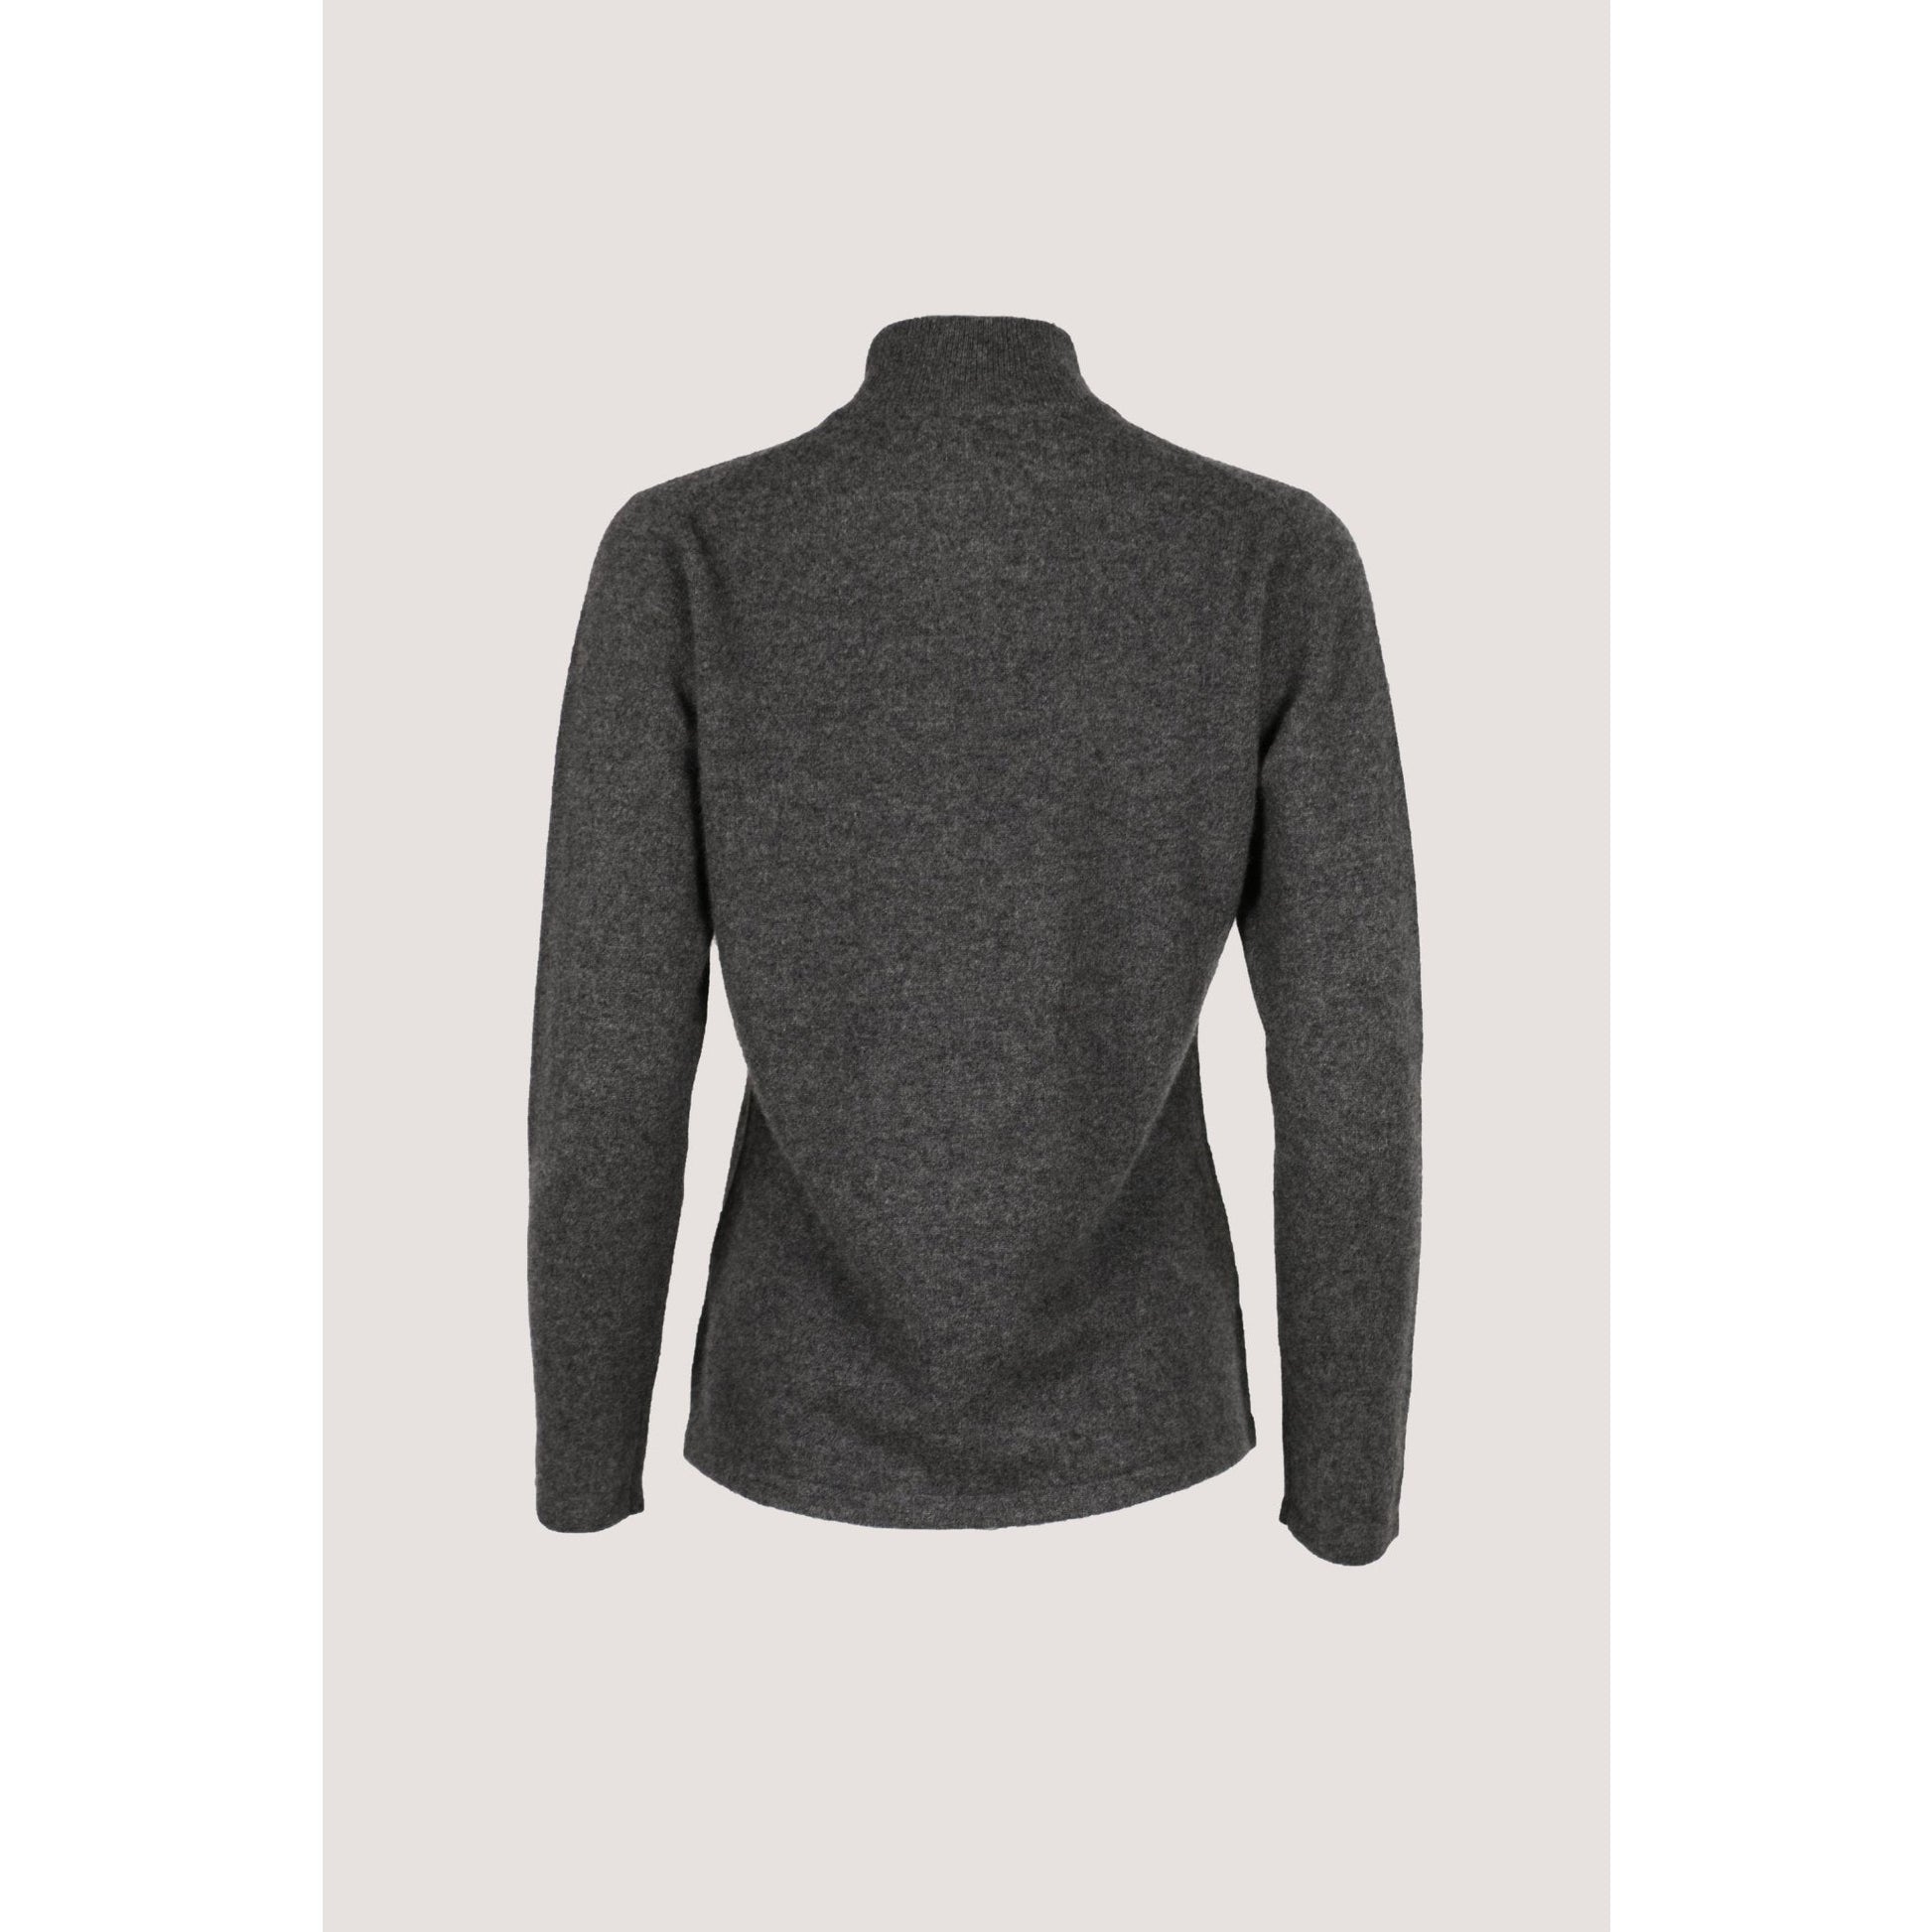 Half Roll Neck Sweater Charcoal - Crumpet Chowk